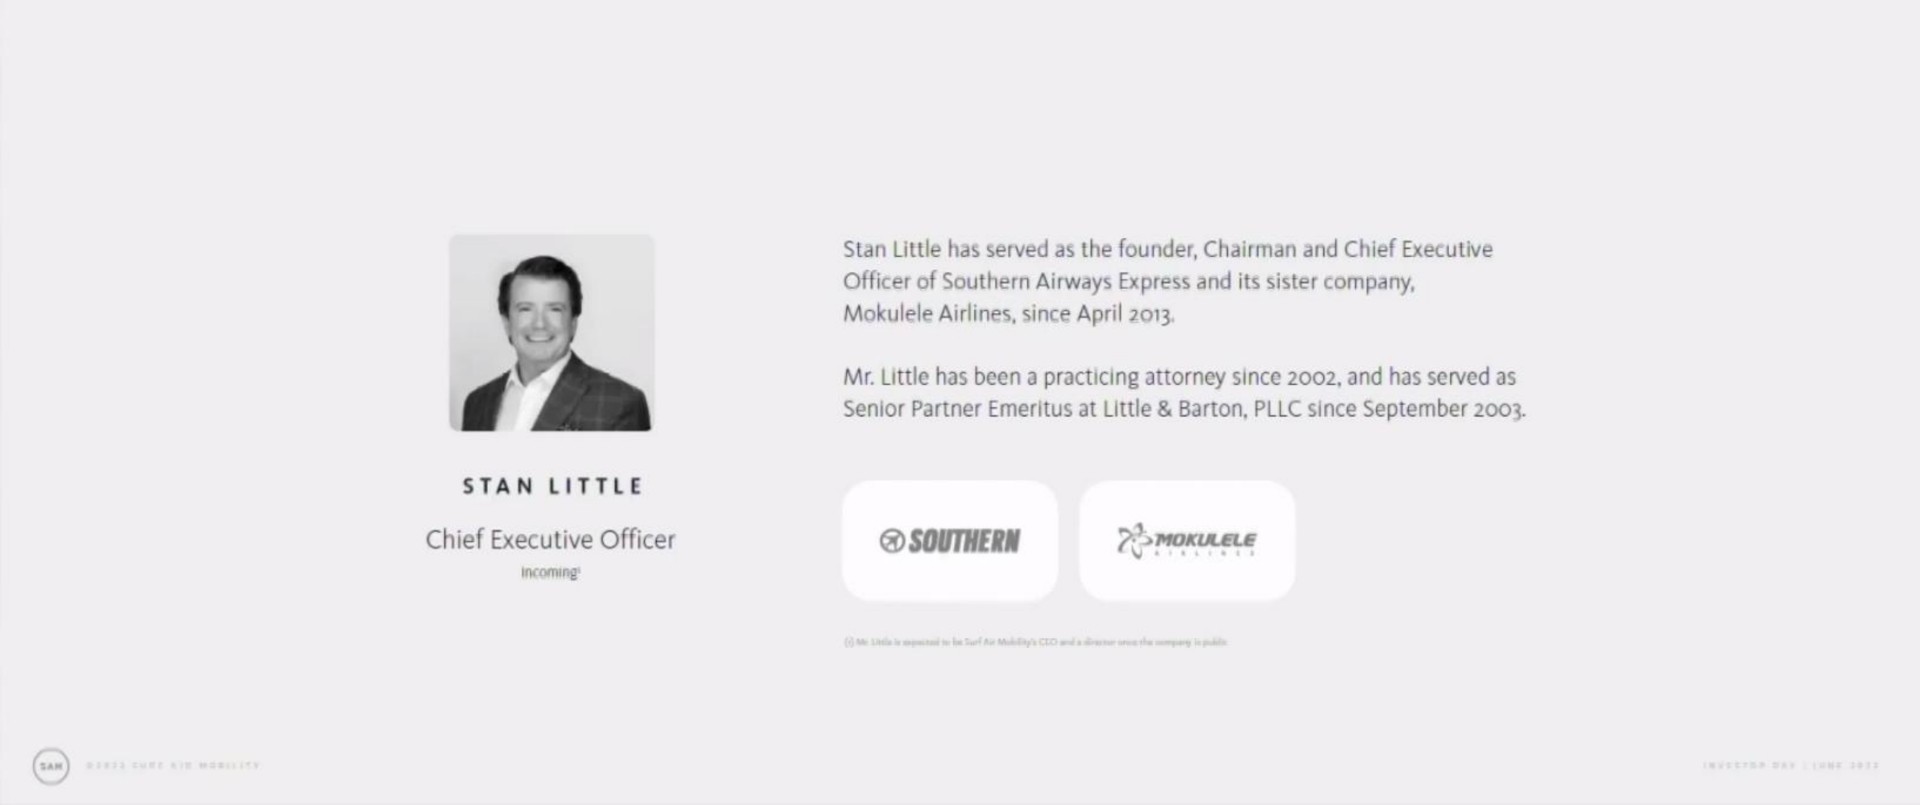 little has served as the founder chairman and chief executive officer of southern airways express and its sister company since little has been a practicing attorney since and has served as senior partner emeritus at little barton since southern little chief executive officer incoming | Surf Air